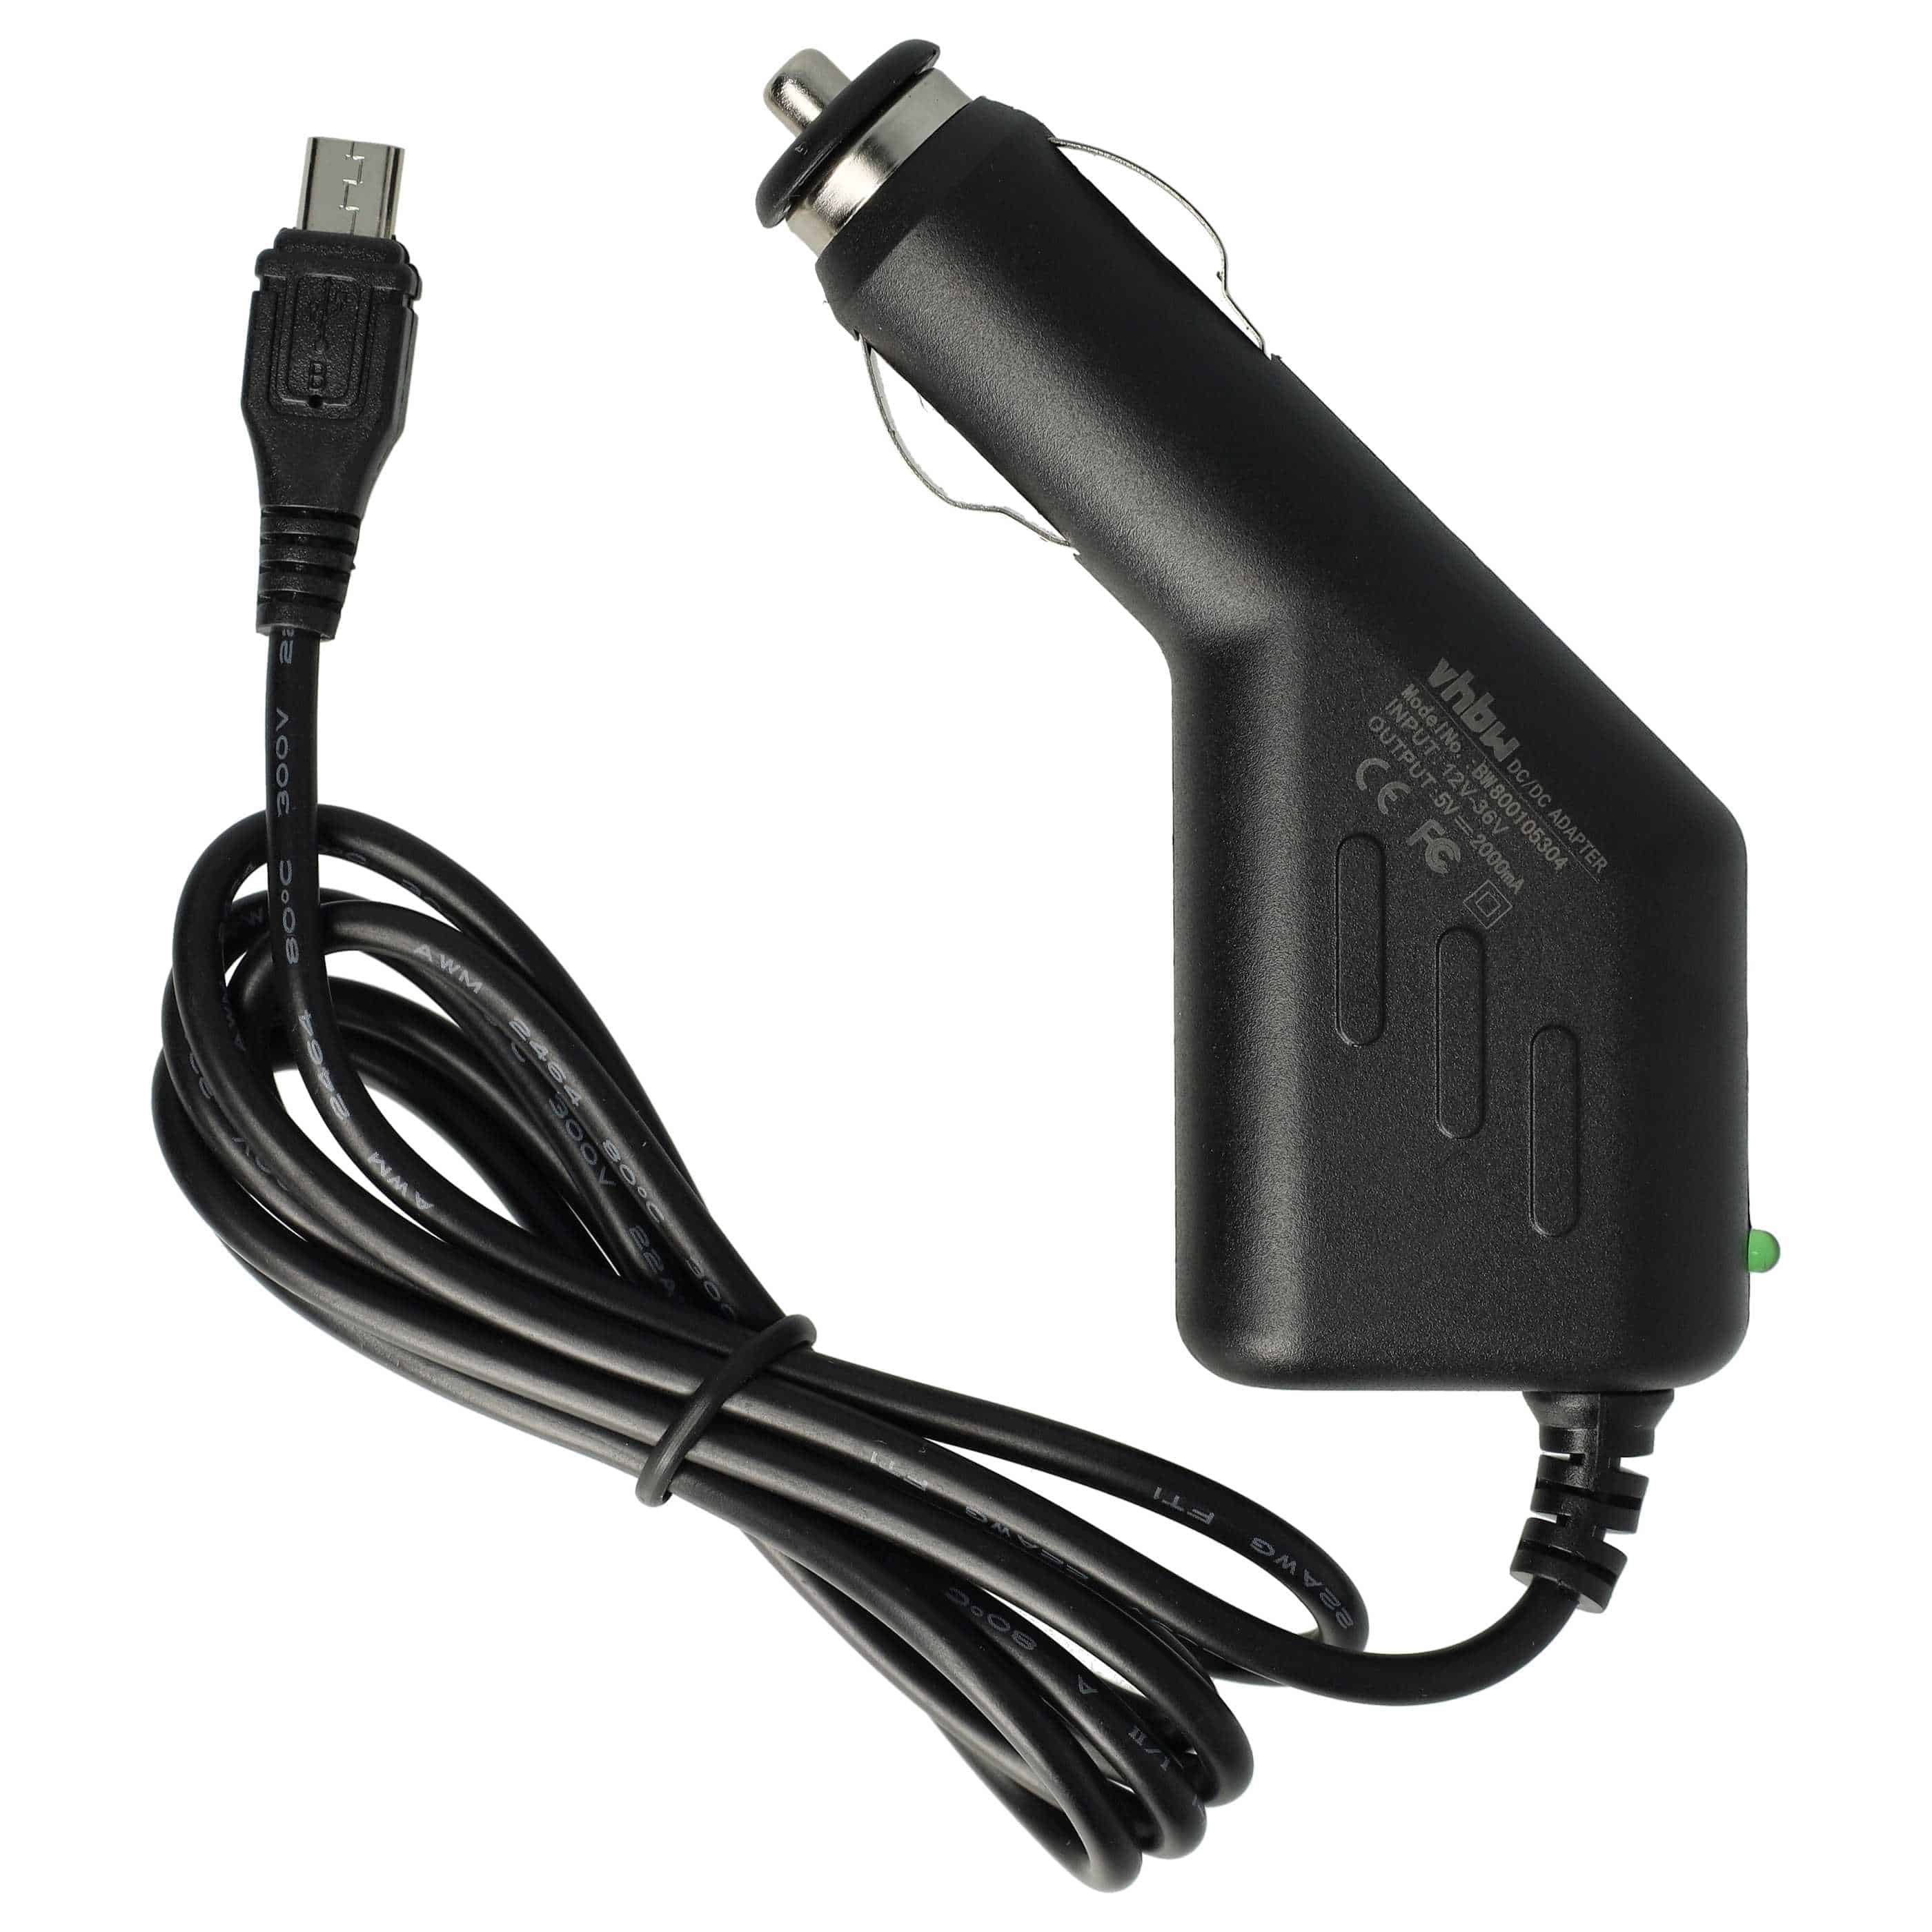 Chargeur voiture micro-USB 2,0 A pour smartphone, GPS Olympia et autres - allume-cigare